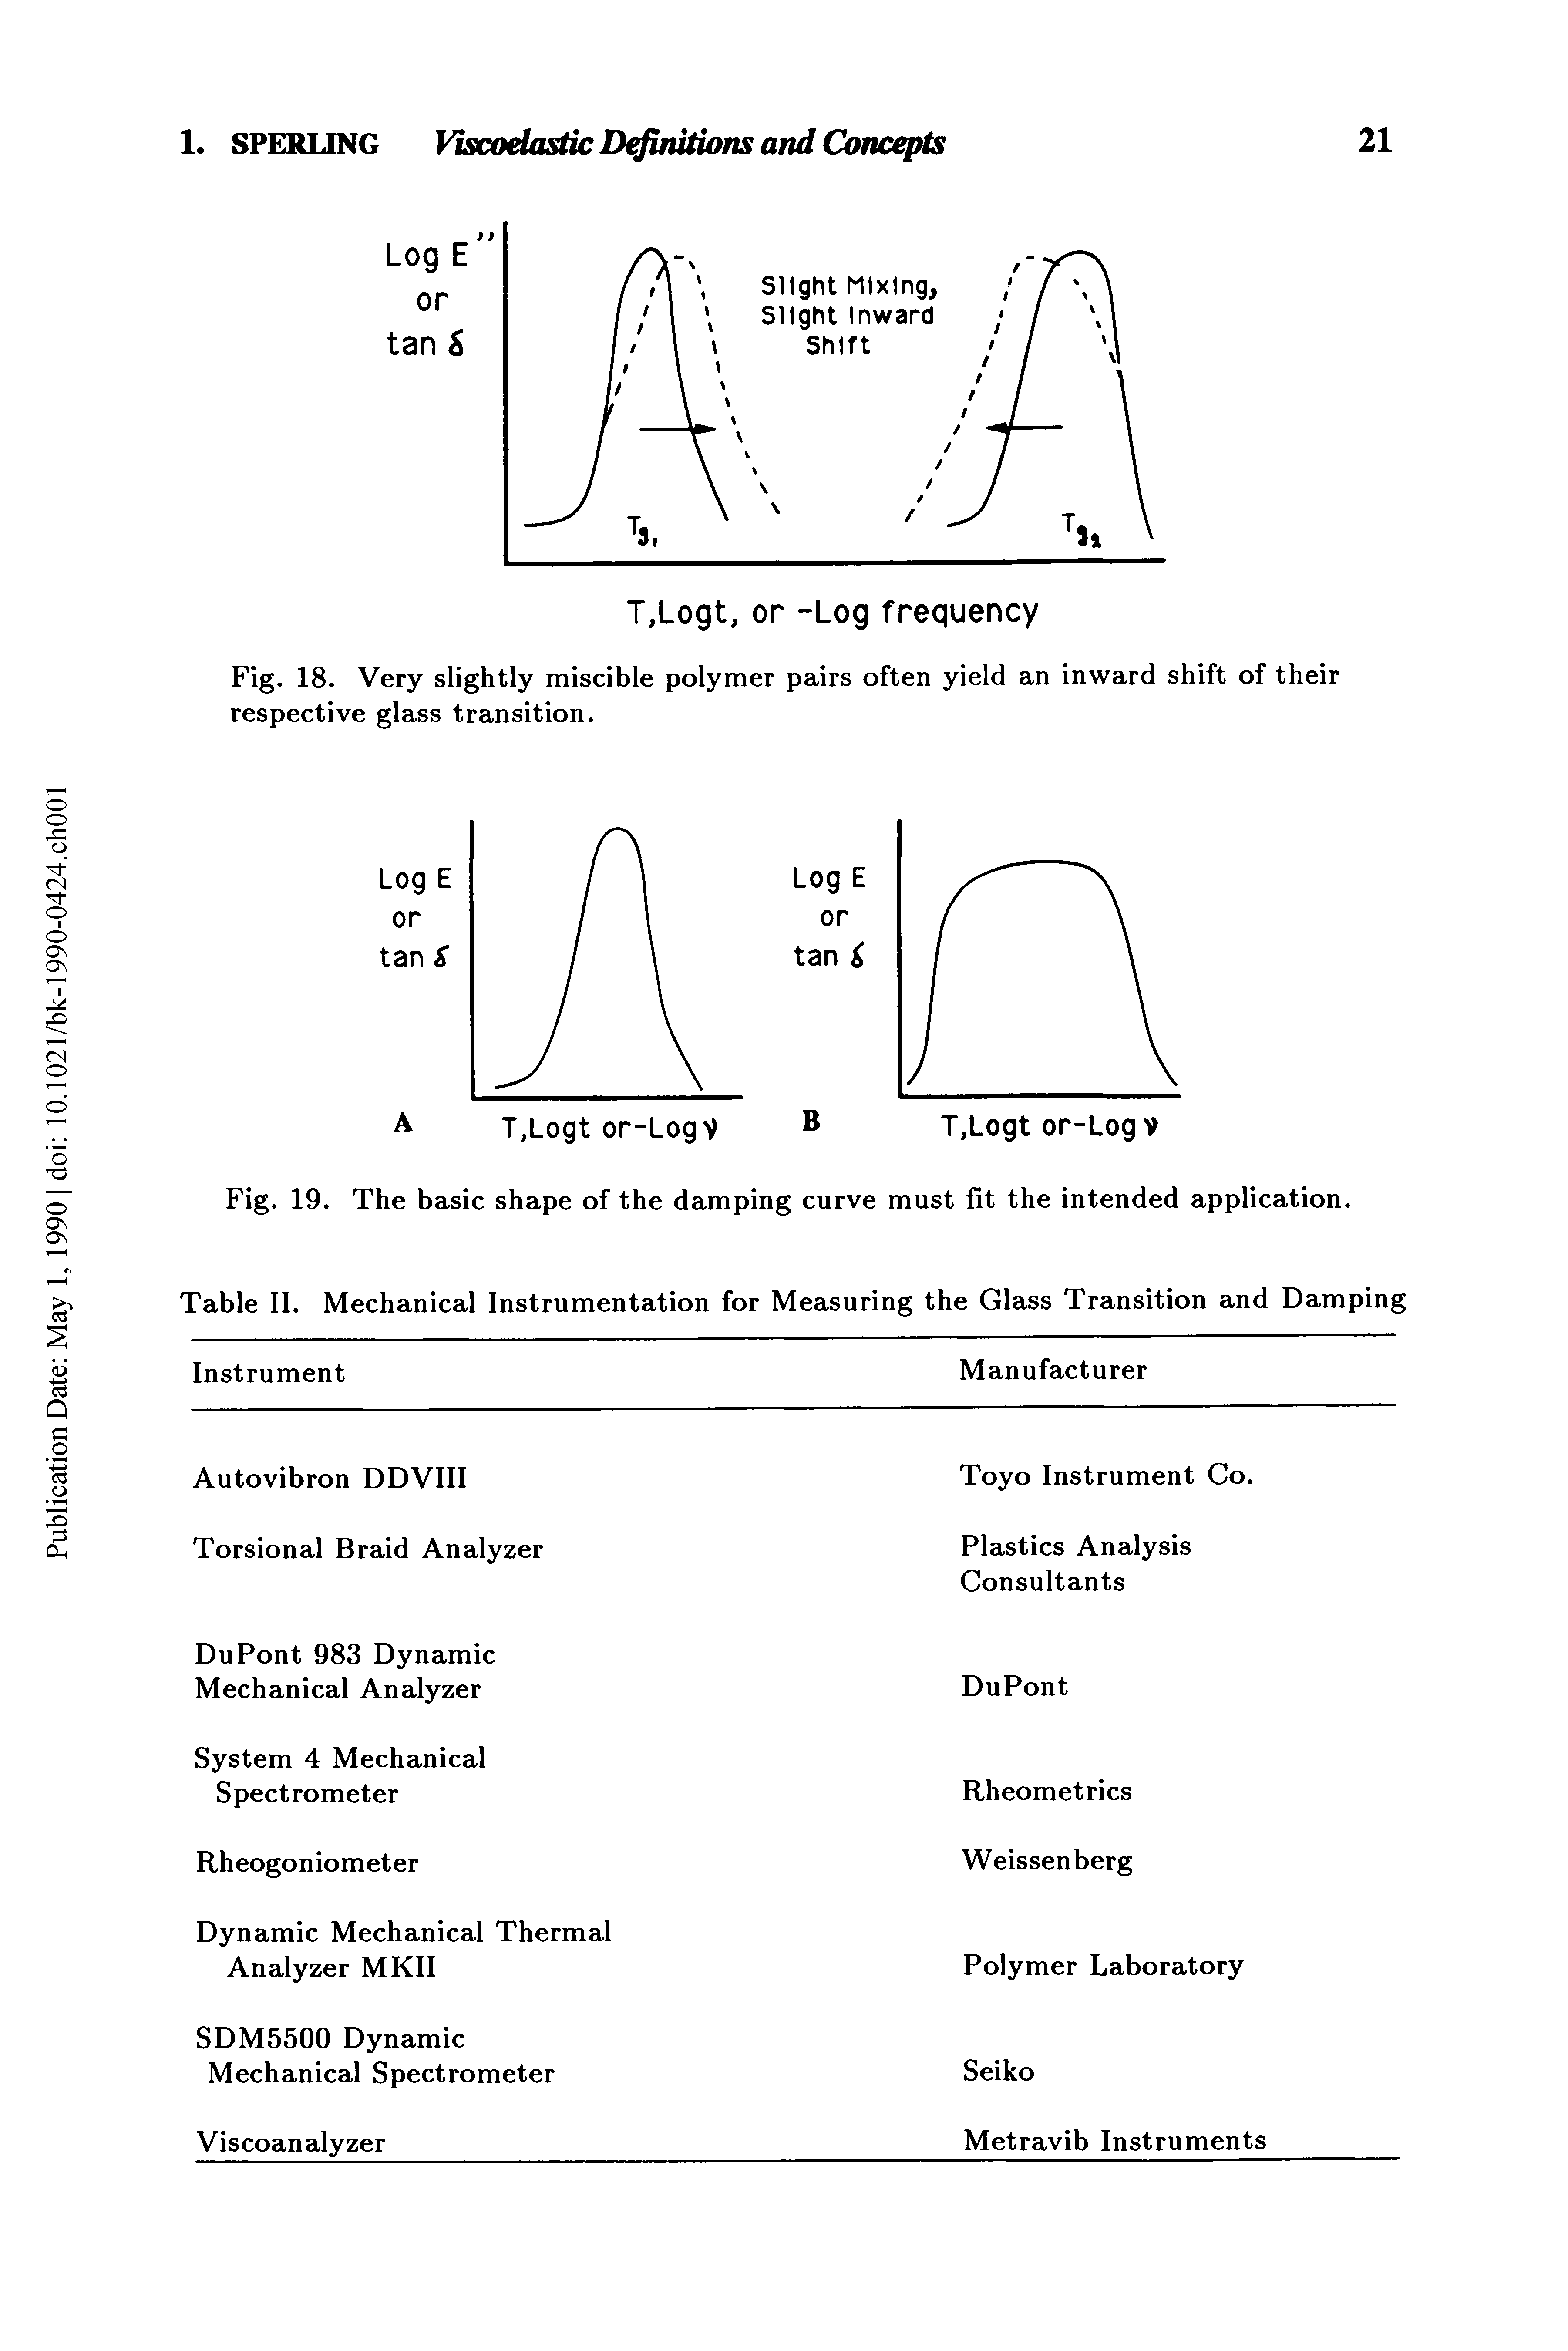 Fig. 19. The basic shape of the damping curve must fit the intended application. Table II. Mechanical Instrumentation for Measuring the Glass Transition and Damping...